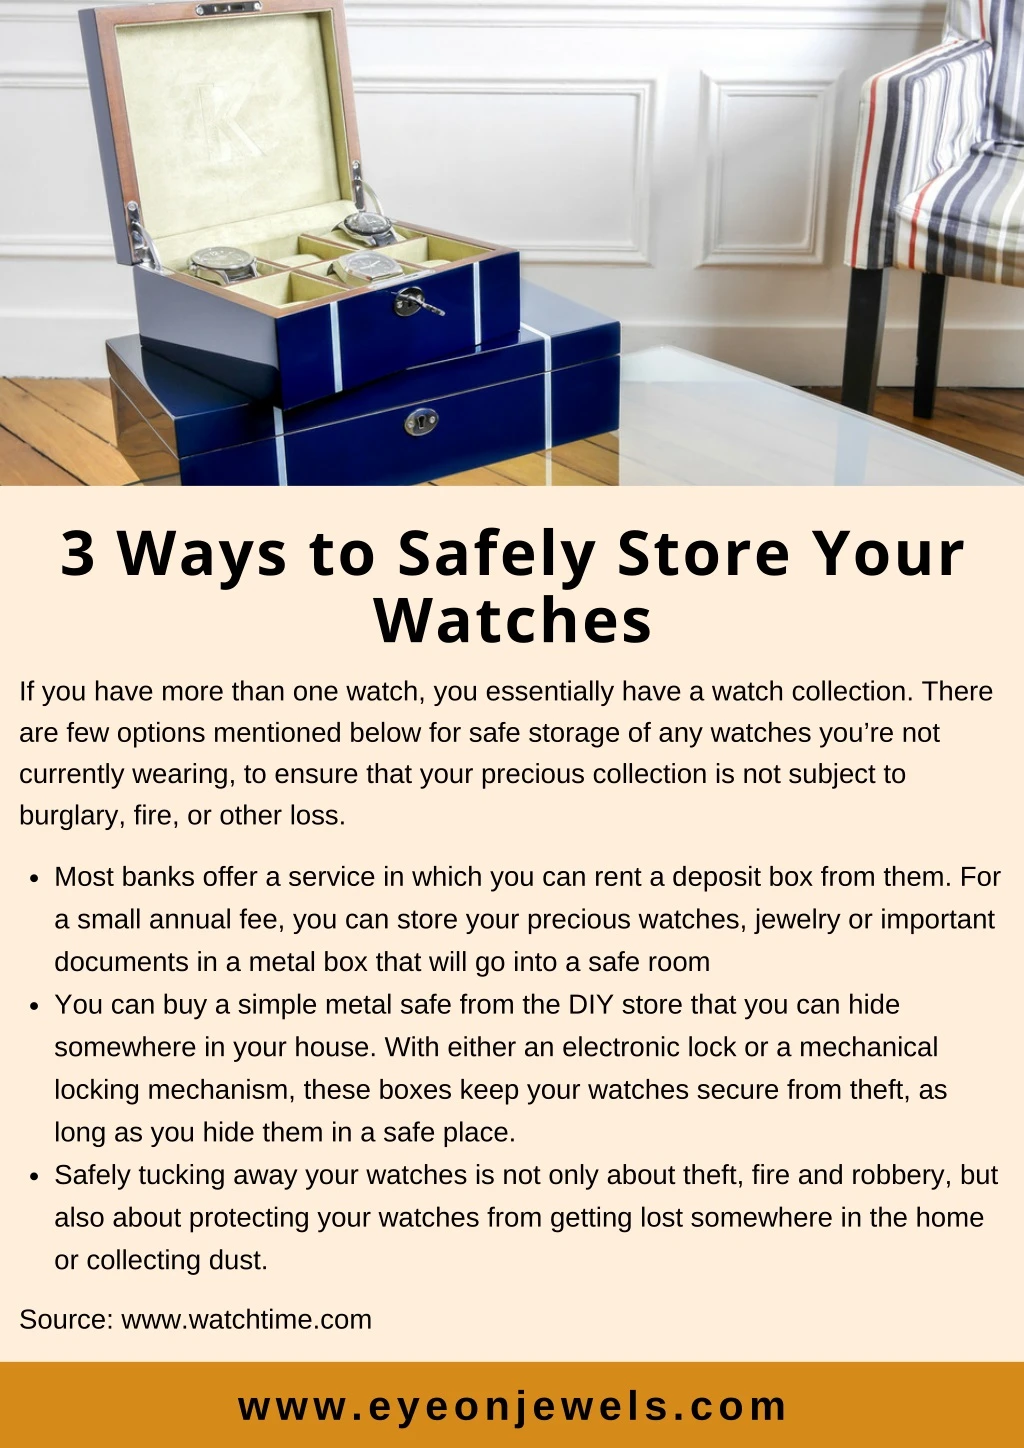 3 ways to safely store your watches